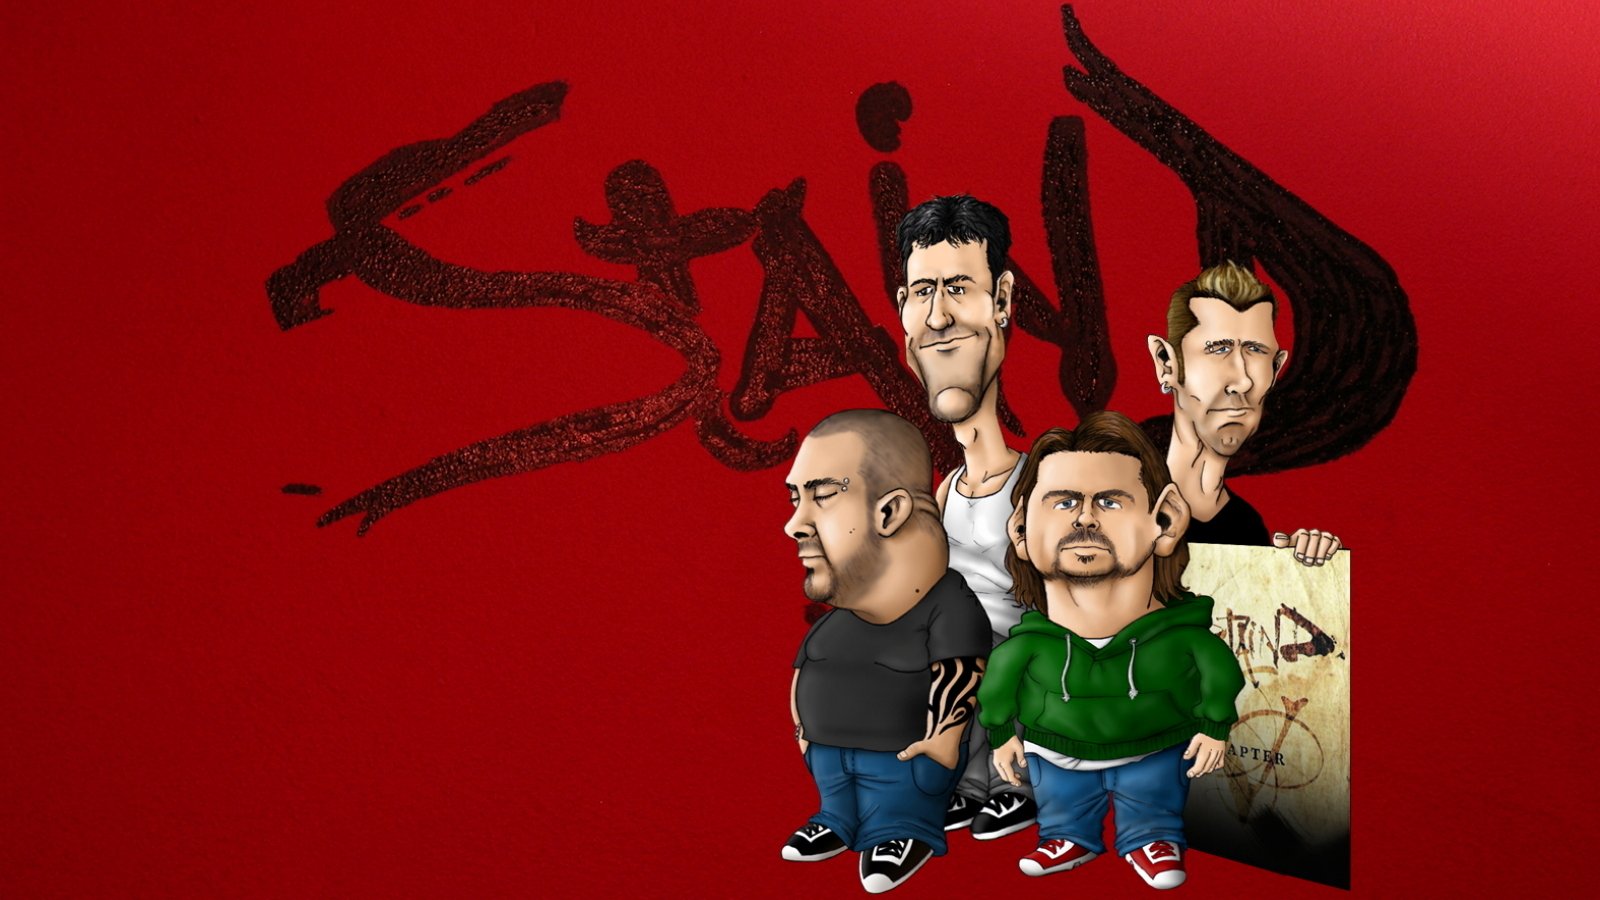 Staind Backgrounds, Compatible - PC, Mobile, Gadgets| 1600x900 px